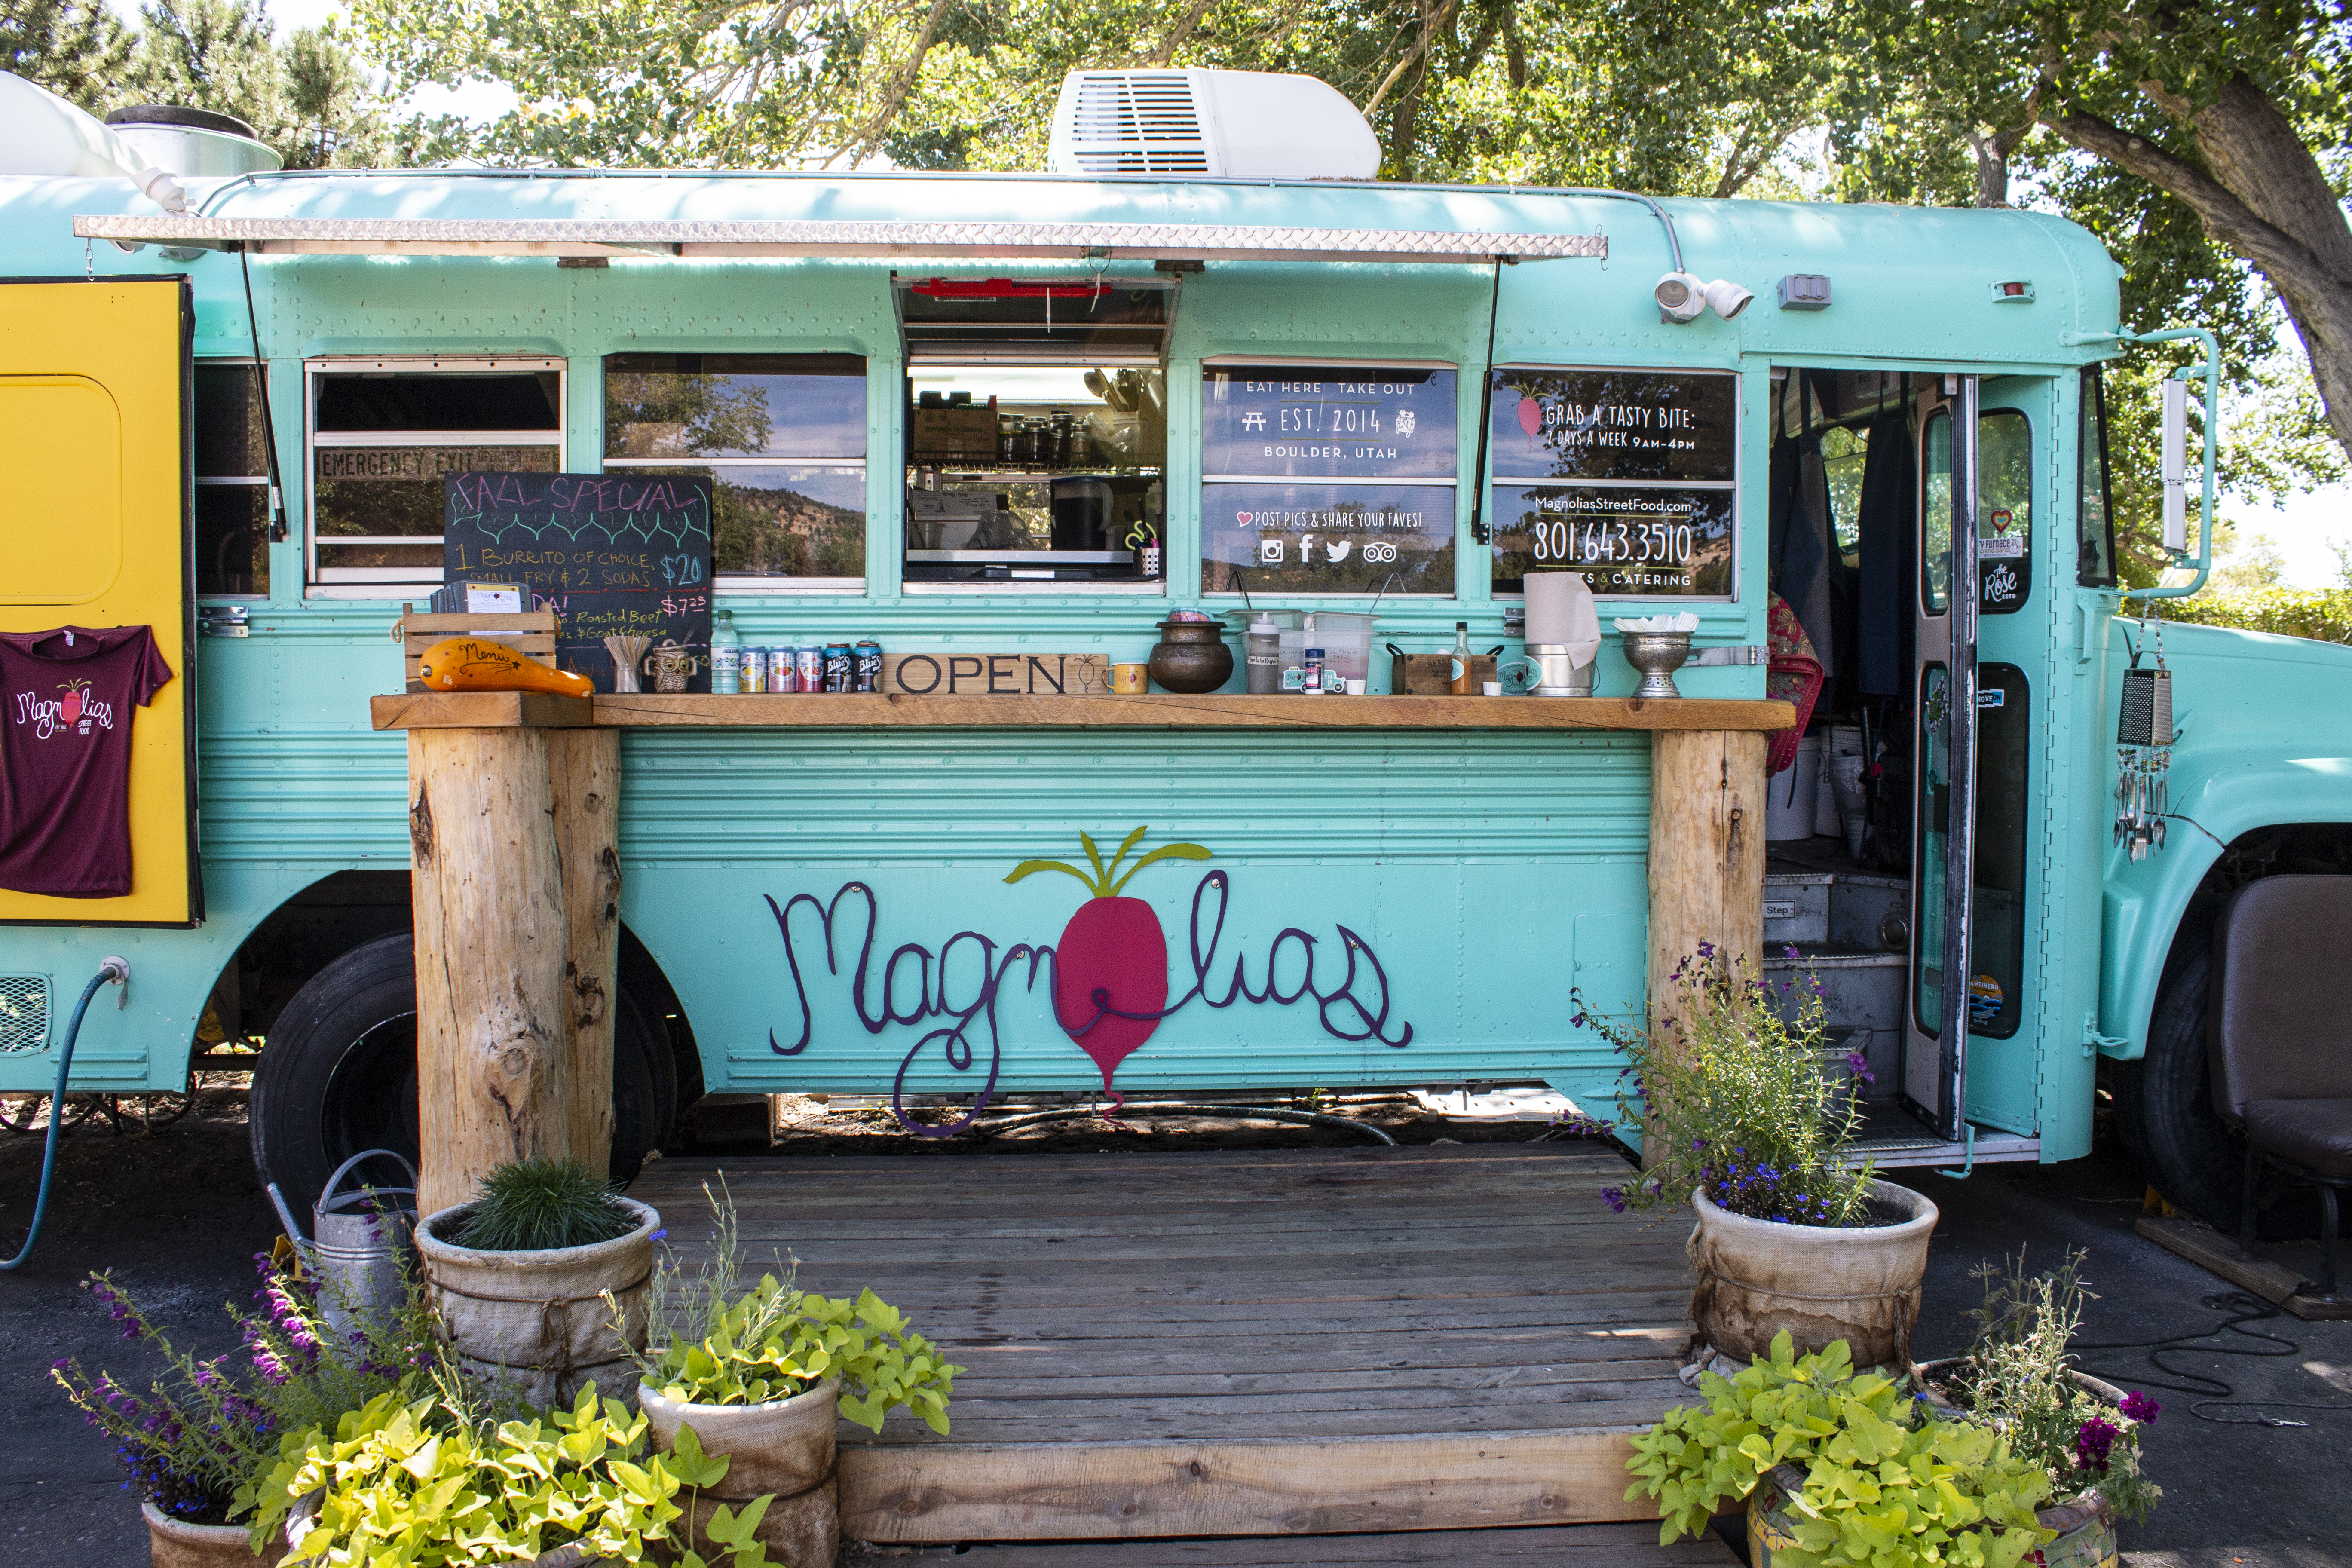 Aqua-colored school bus converted to food truck and named "Magnolias"